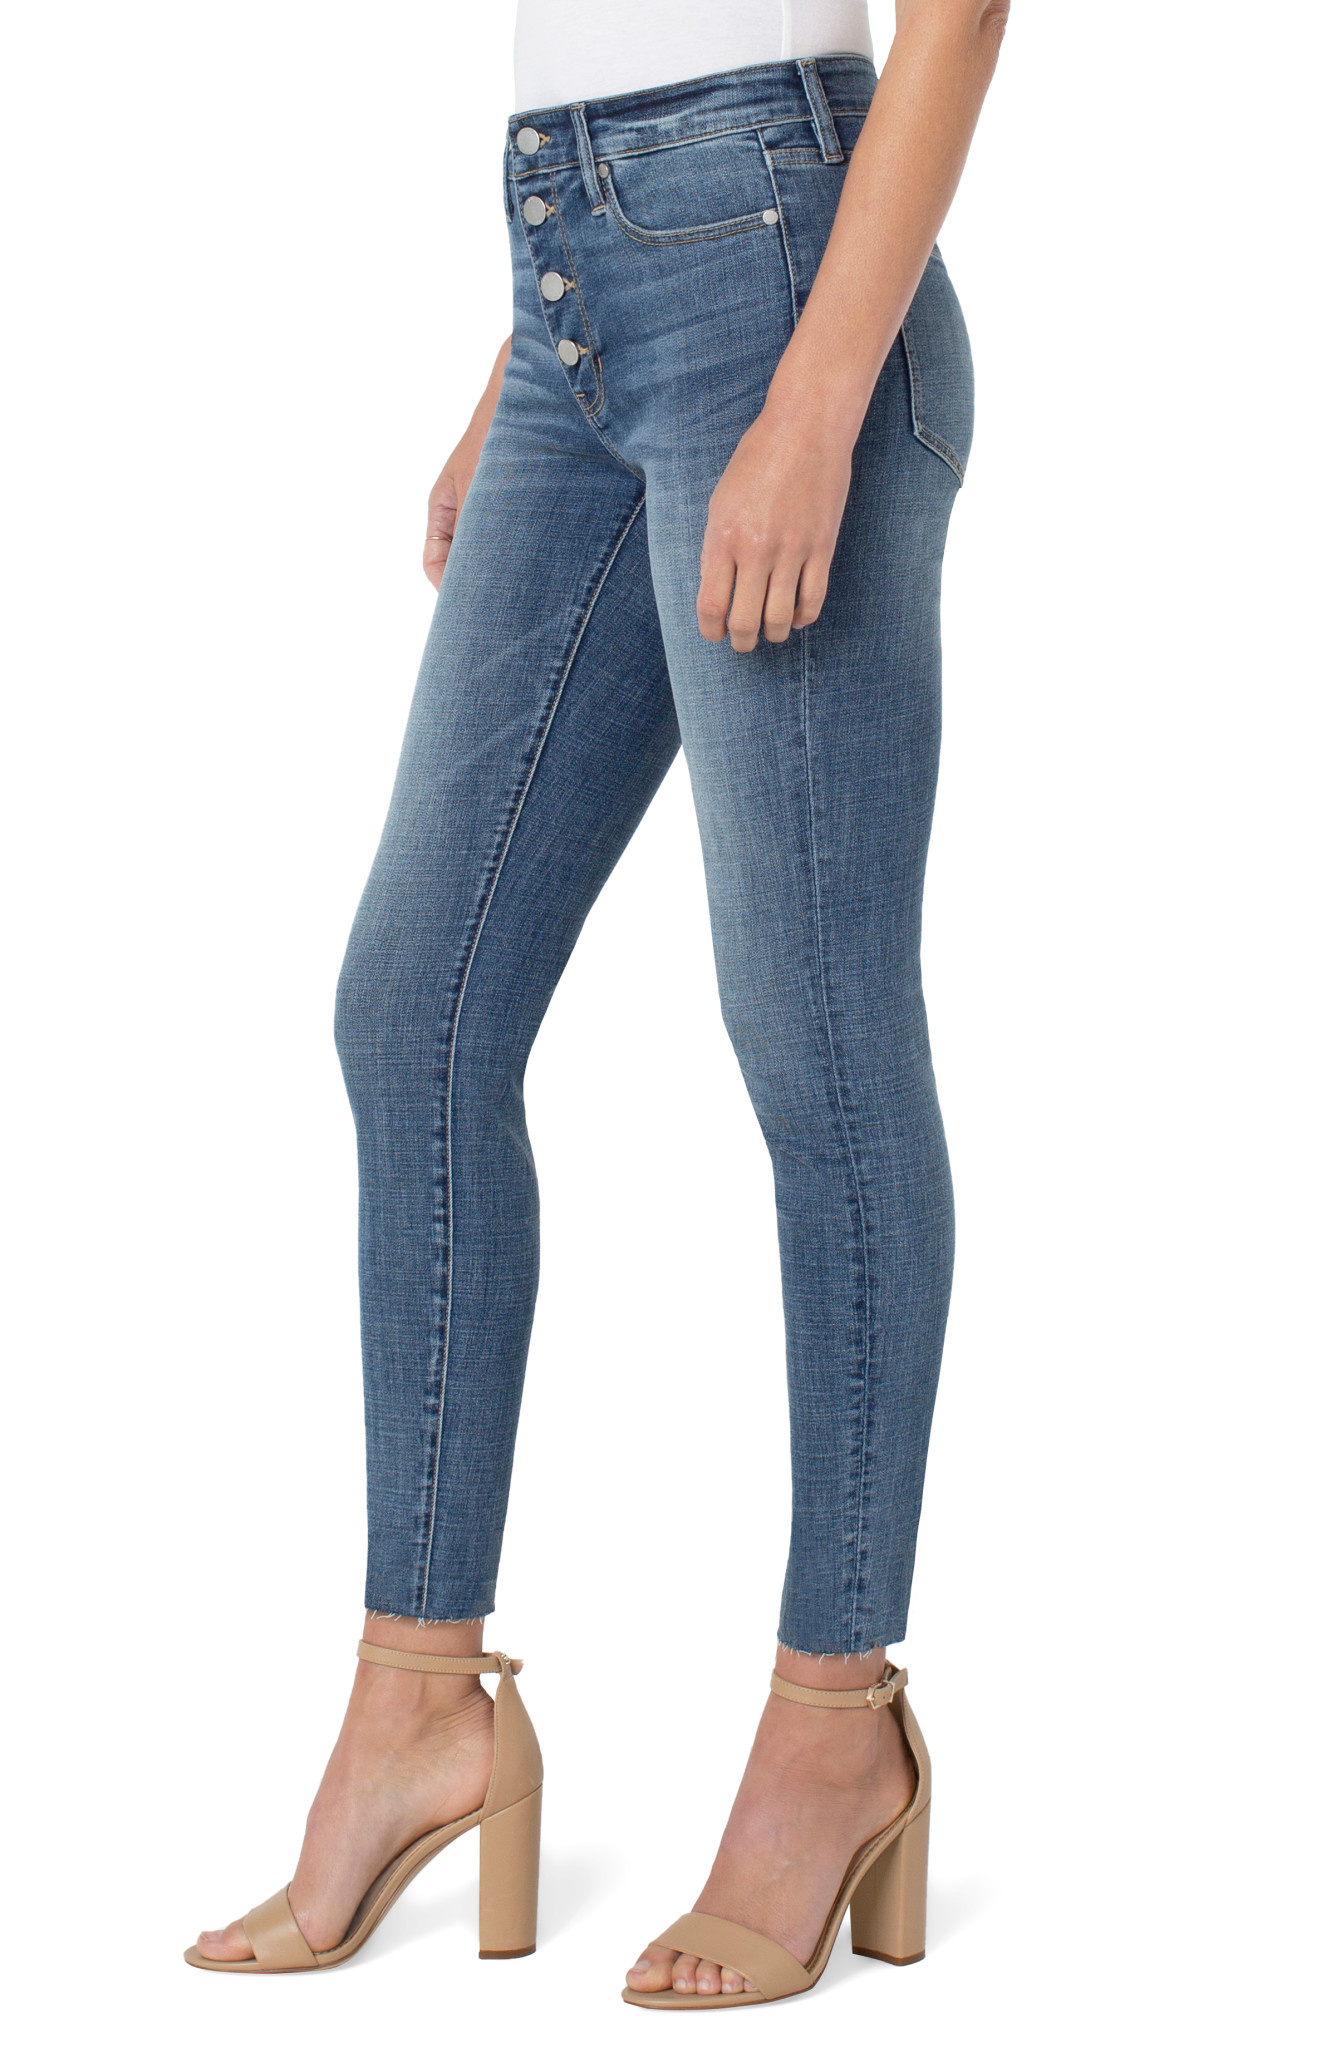 Liverpool Los Angeles Abby HR Ankle Skinny w/exposed Bottom & Cut Hem Jeans